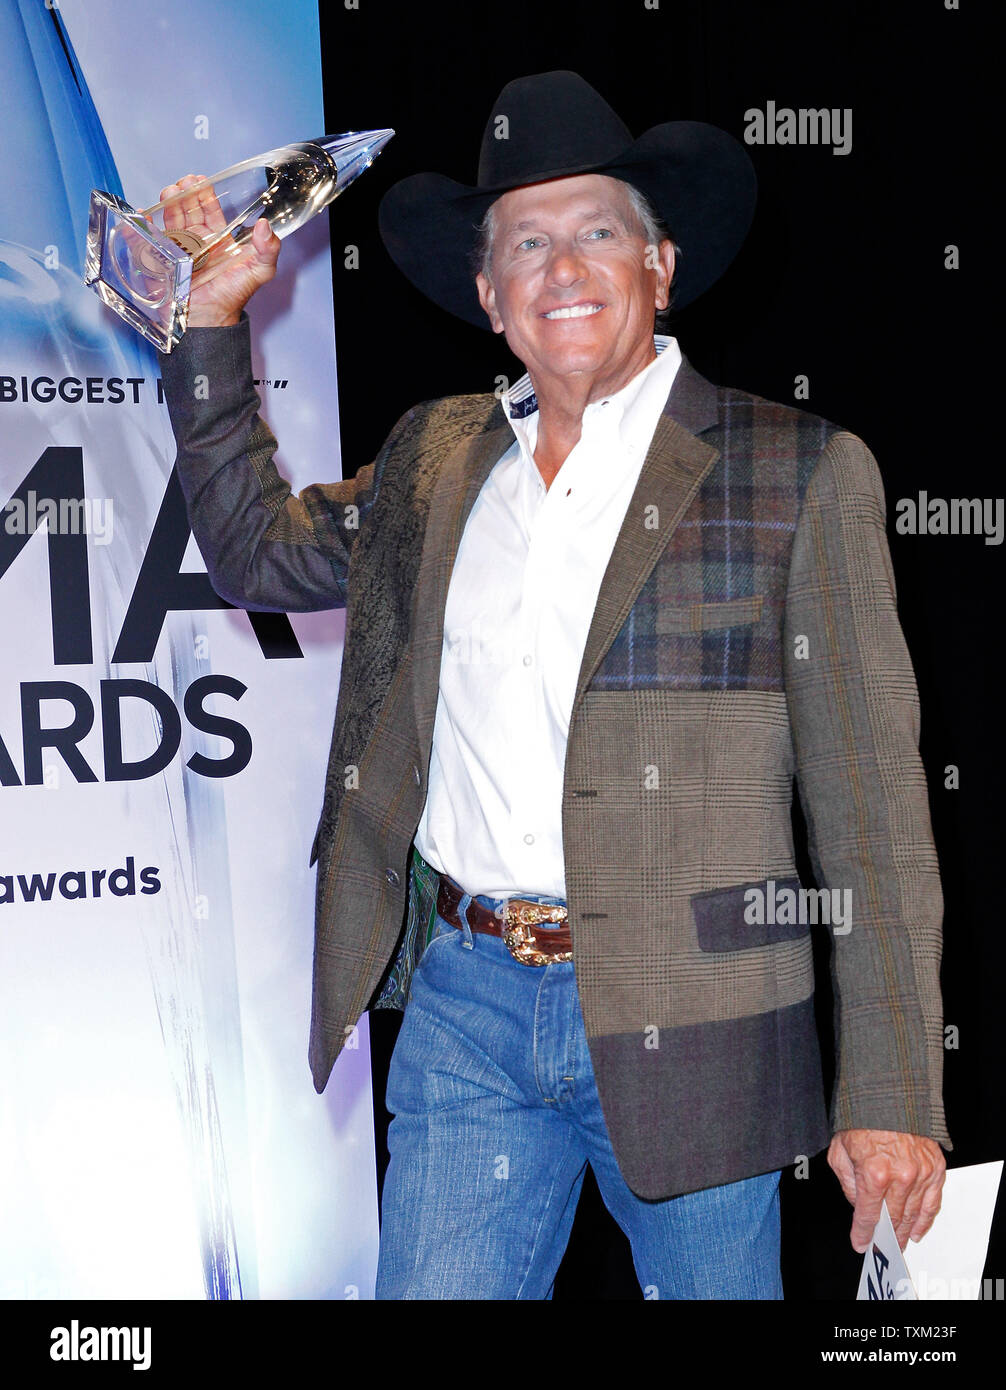 Entertainer of the Year George Strait poses backstage with his trophy at the 47th Annual Country Music Awards at the Bridgestone Arena in Nashville, November 6, 2013. UPI/Terry Wyatt Stock Photo